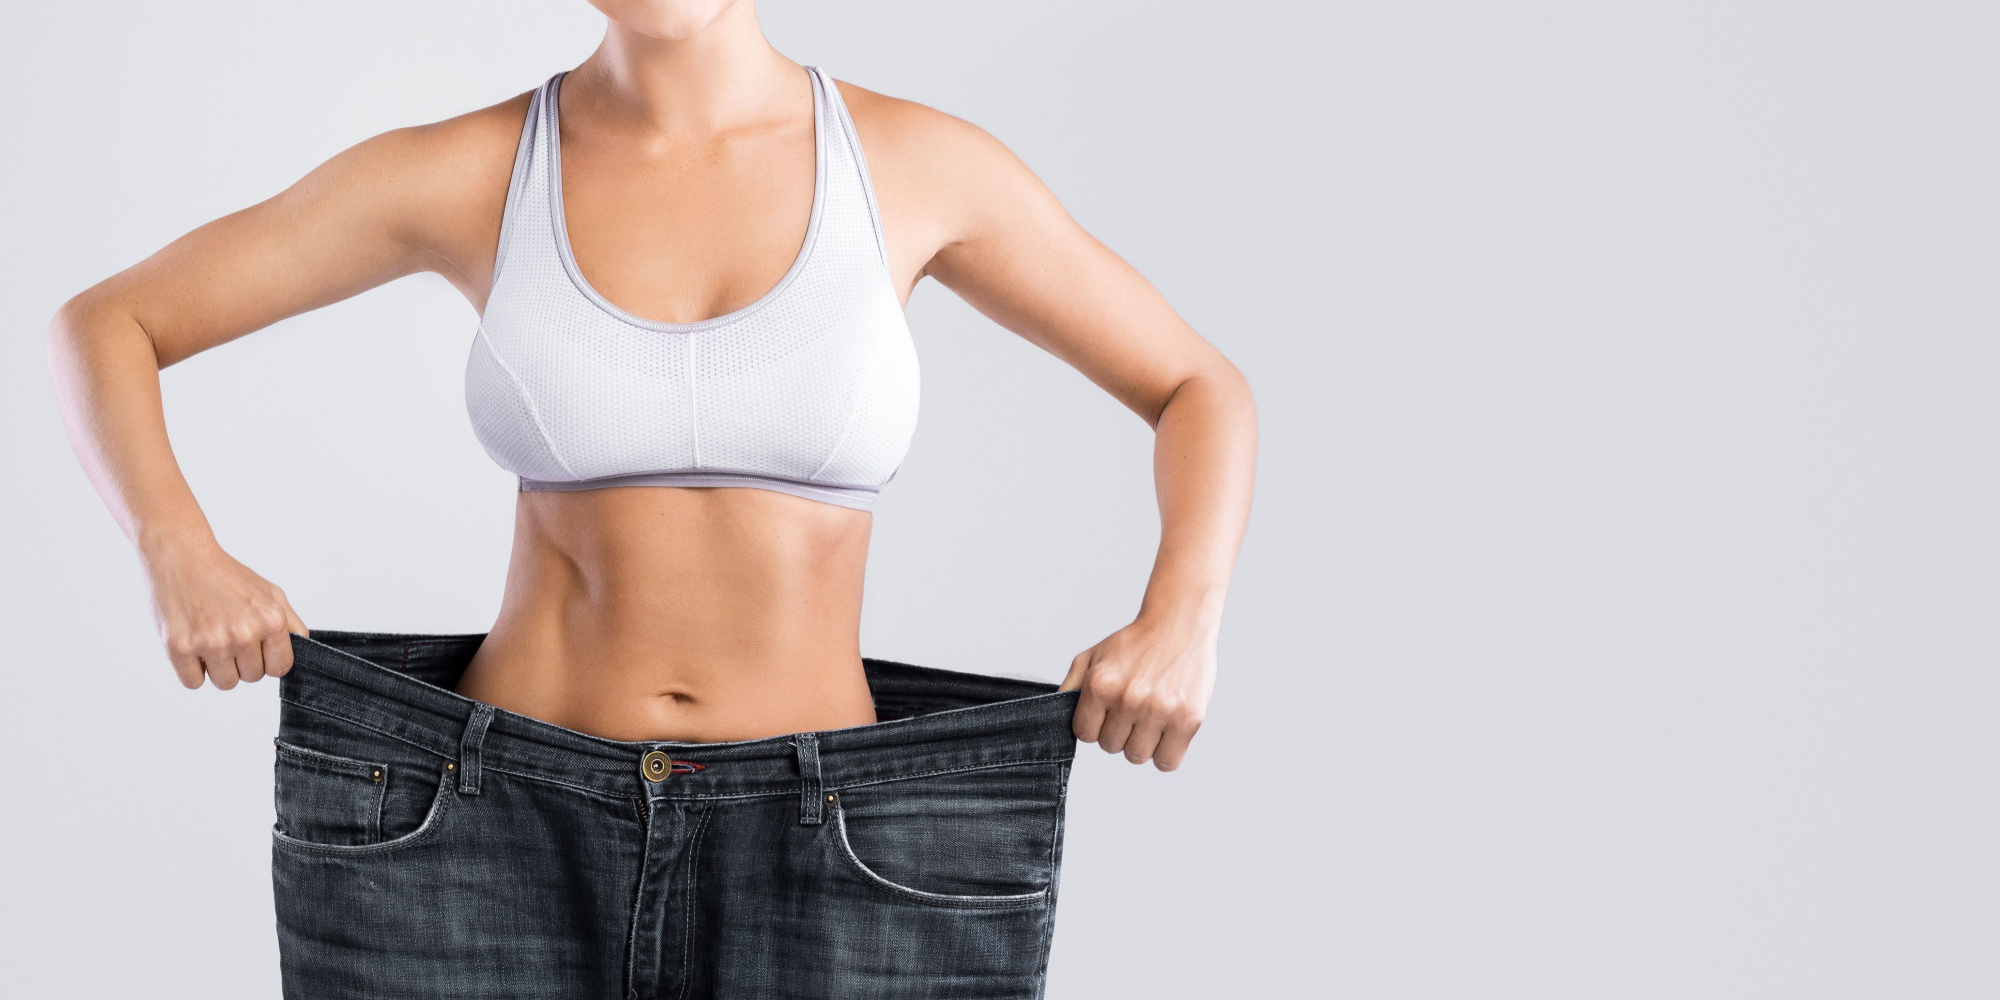 The Most Successful Strategies for Losing Weight